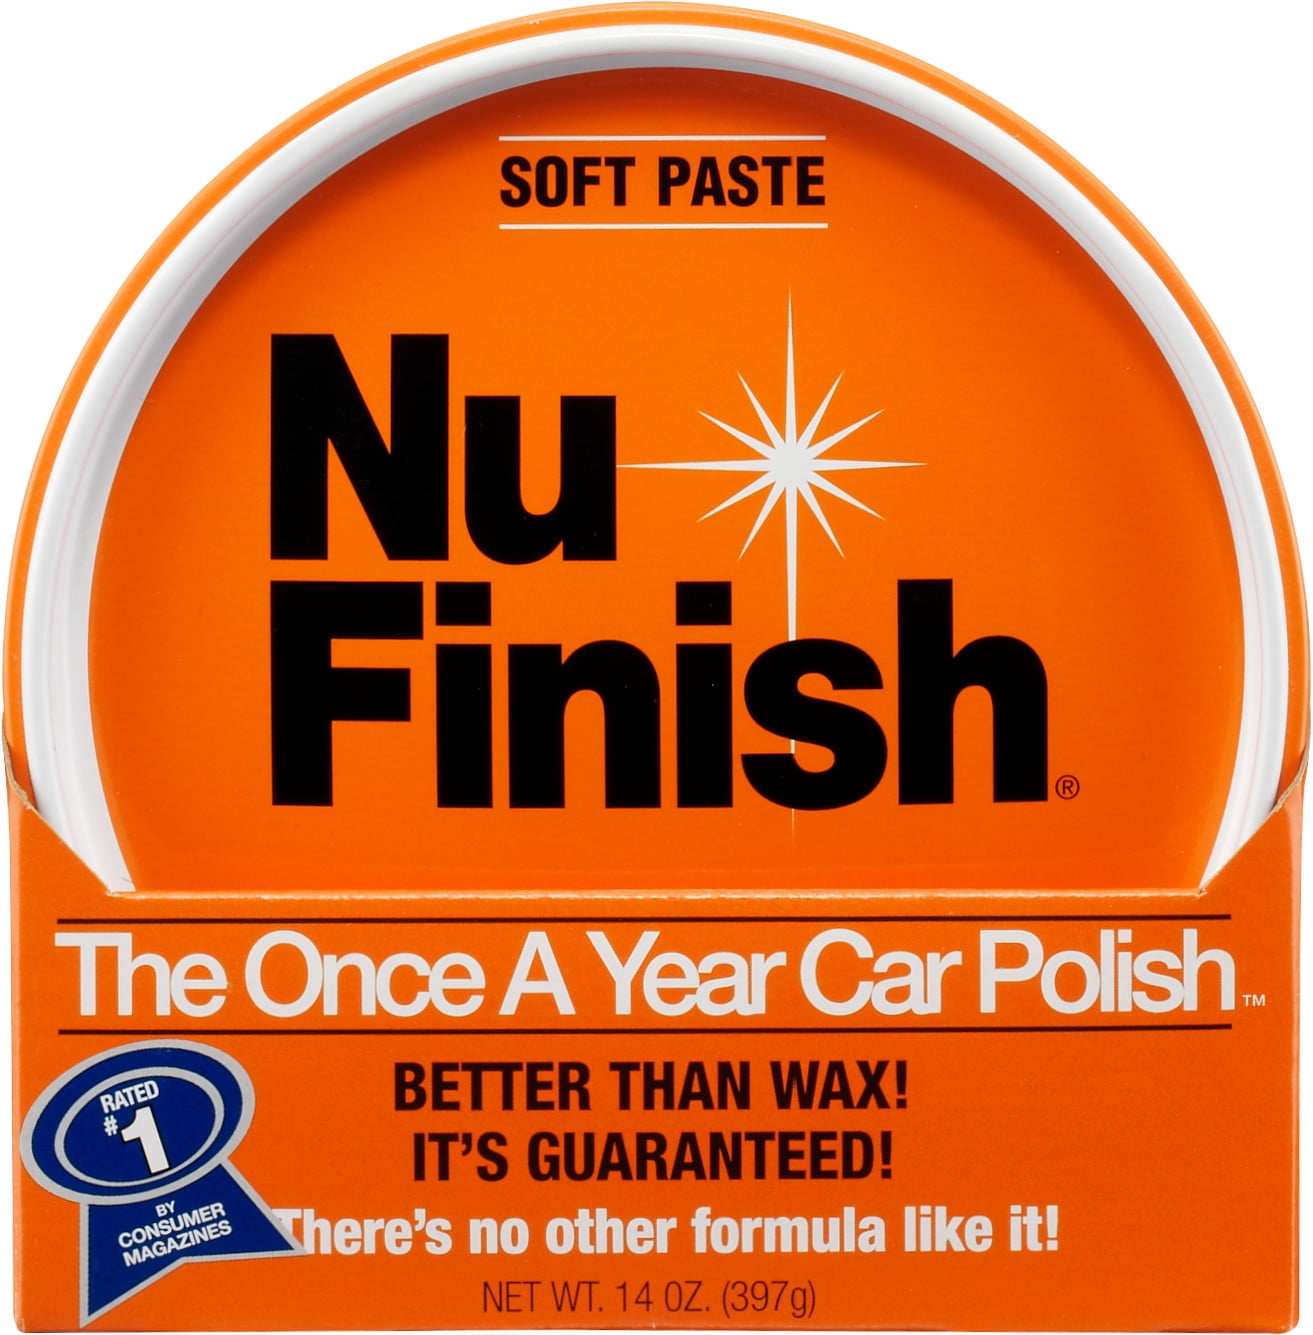 Nu Finish - Q: After months of storing my Car Polish paste, a liquid  appears to have separated from the white paste. Will it harm my car's finish❓  A: Our paste is